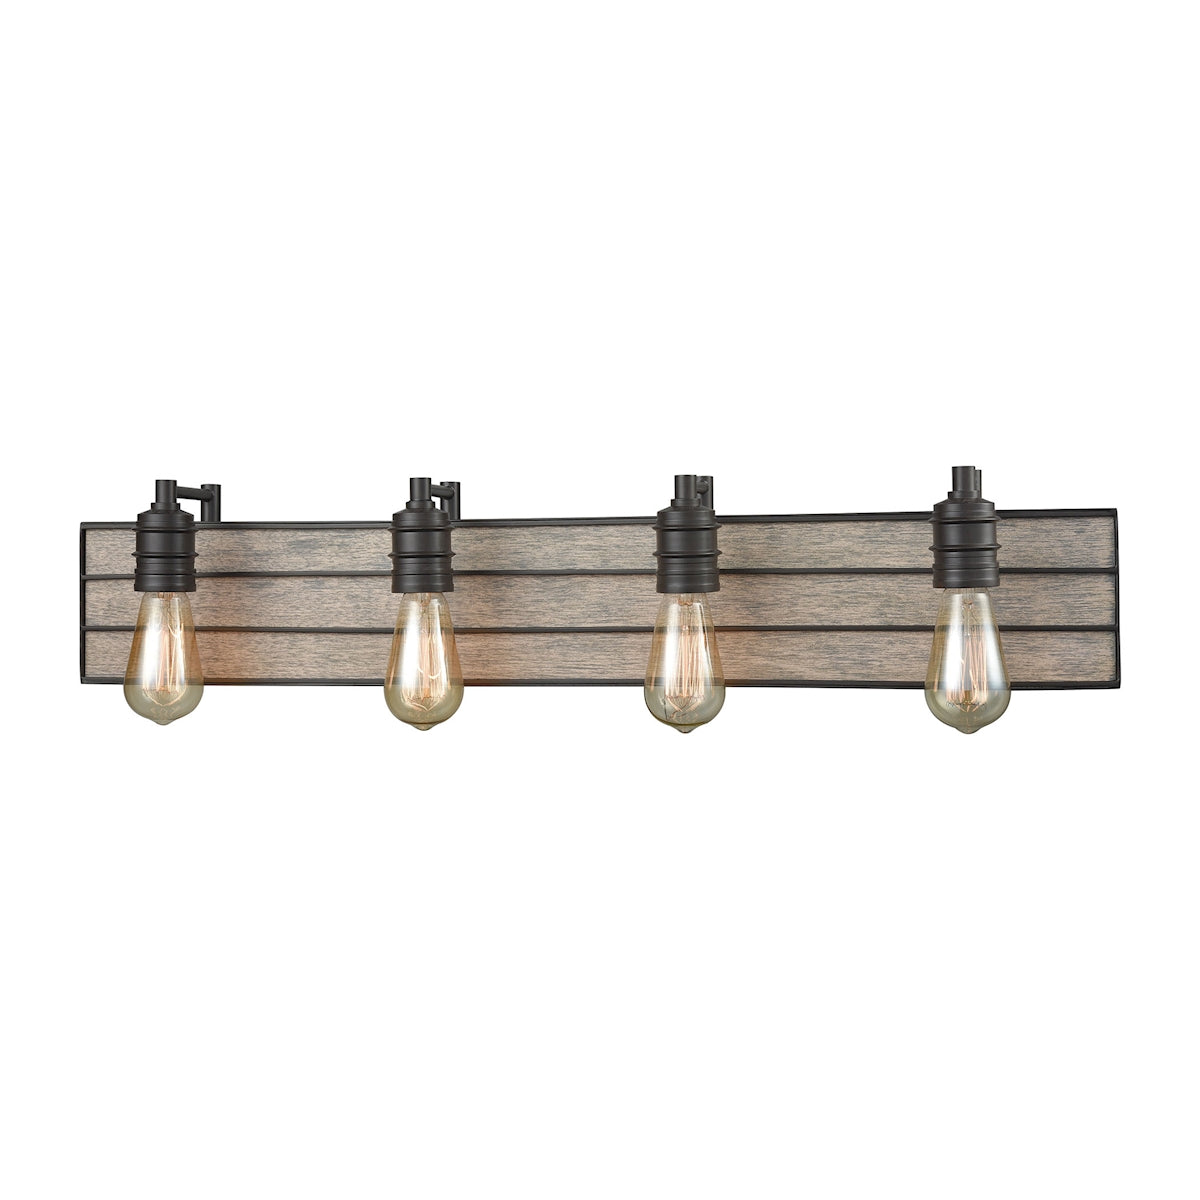 ELK Lighting 16442/4 Brookweiler 4-Light Vanity Sconce in Oil Rubbed Bronze with Washed Wood Backplate